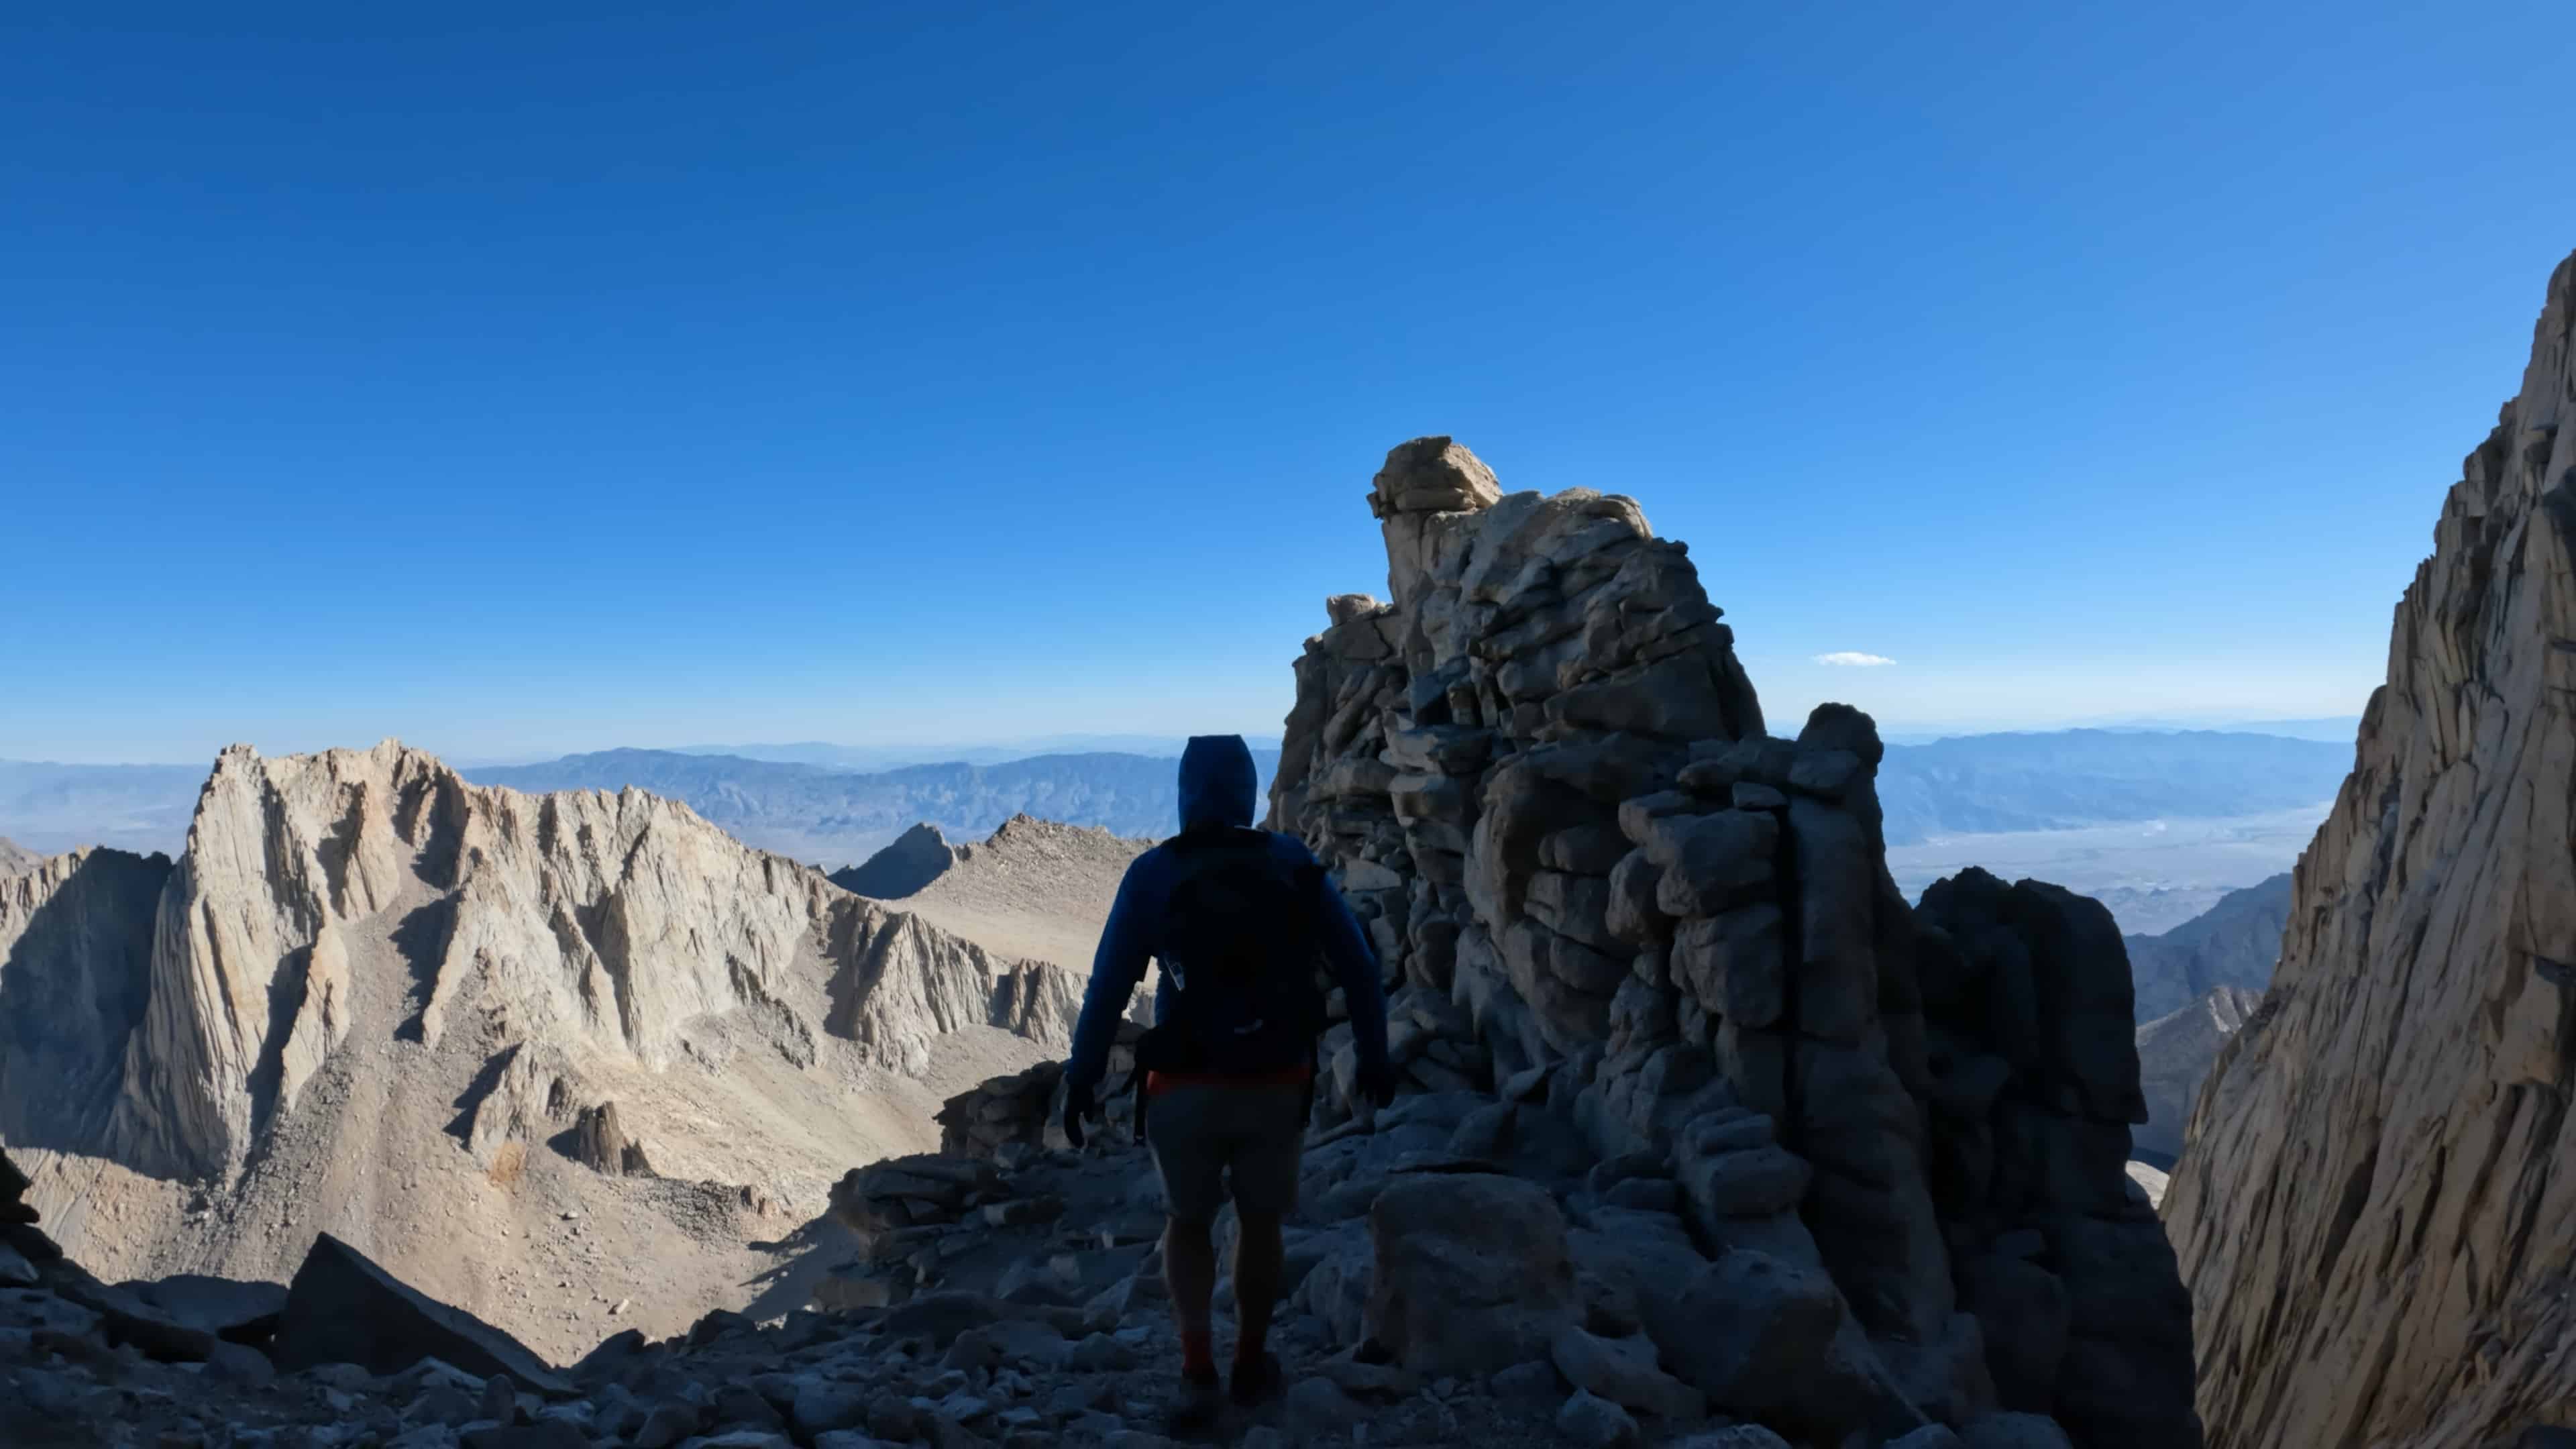 Mt Whitney Day Hike Pictures